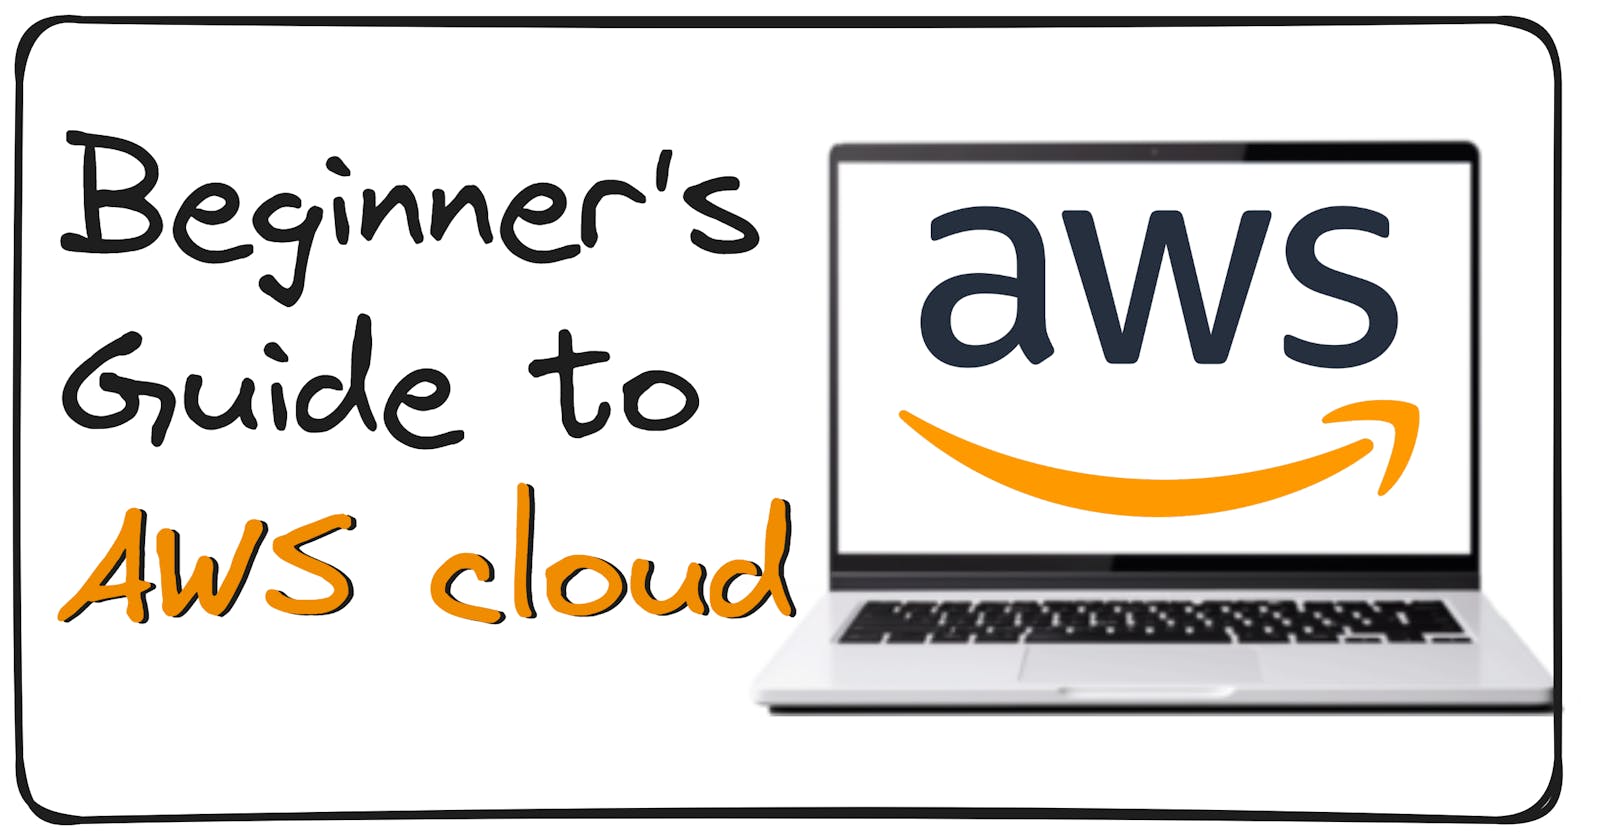 A Beginner's Guide to AWS cloud